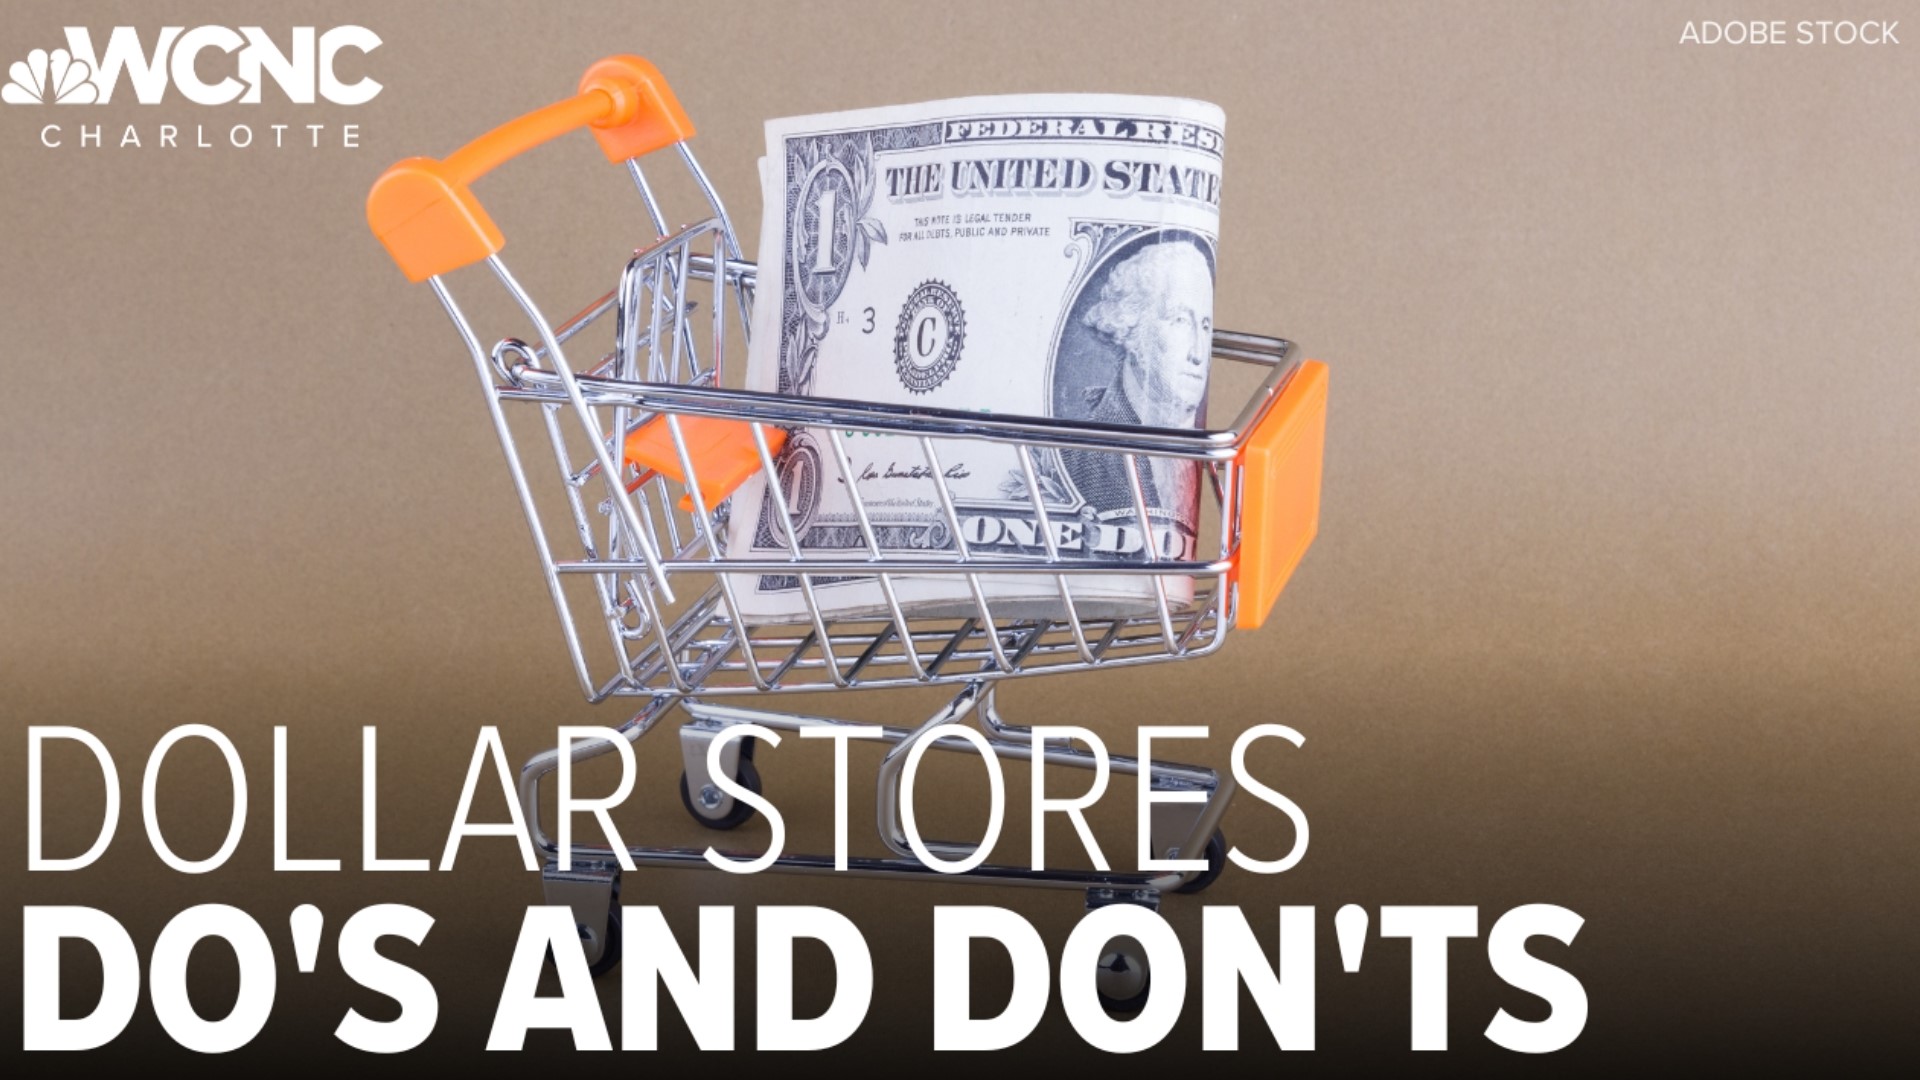 Shopping at a dollar store is a popular strategy to save money and it’s only become more prevalent in this economy.